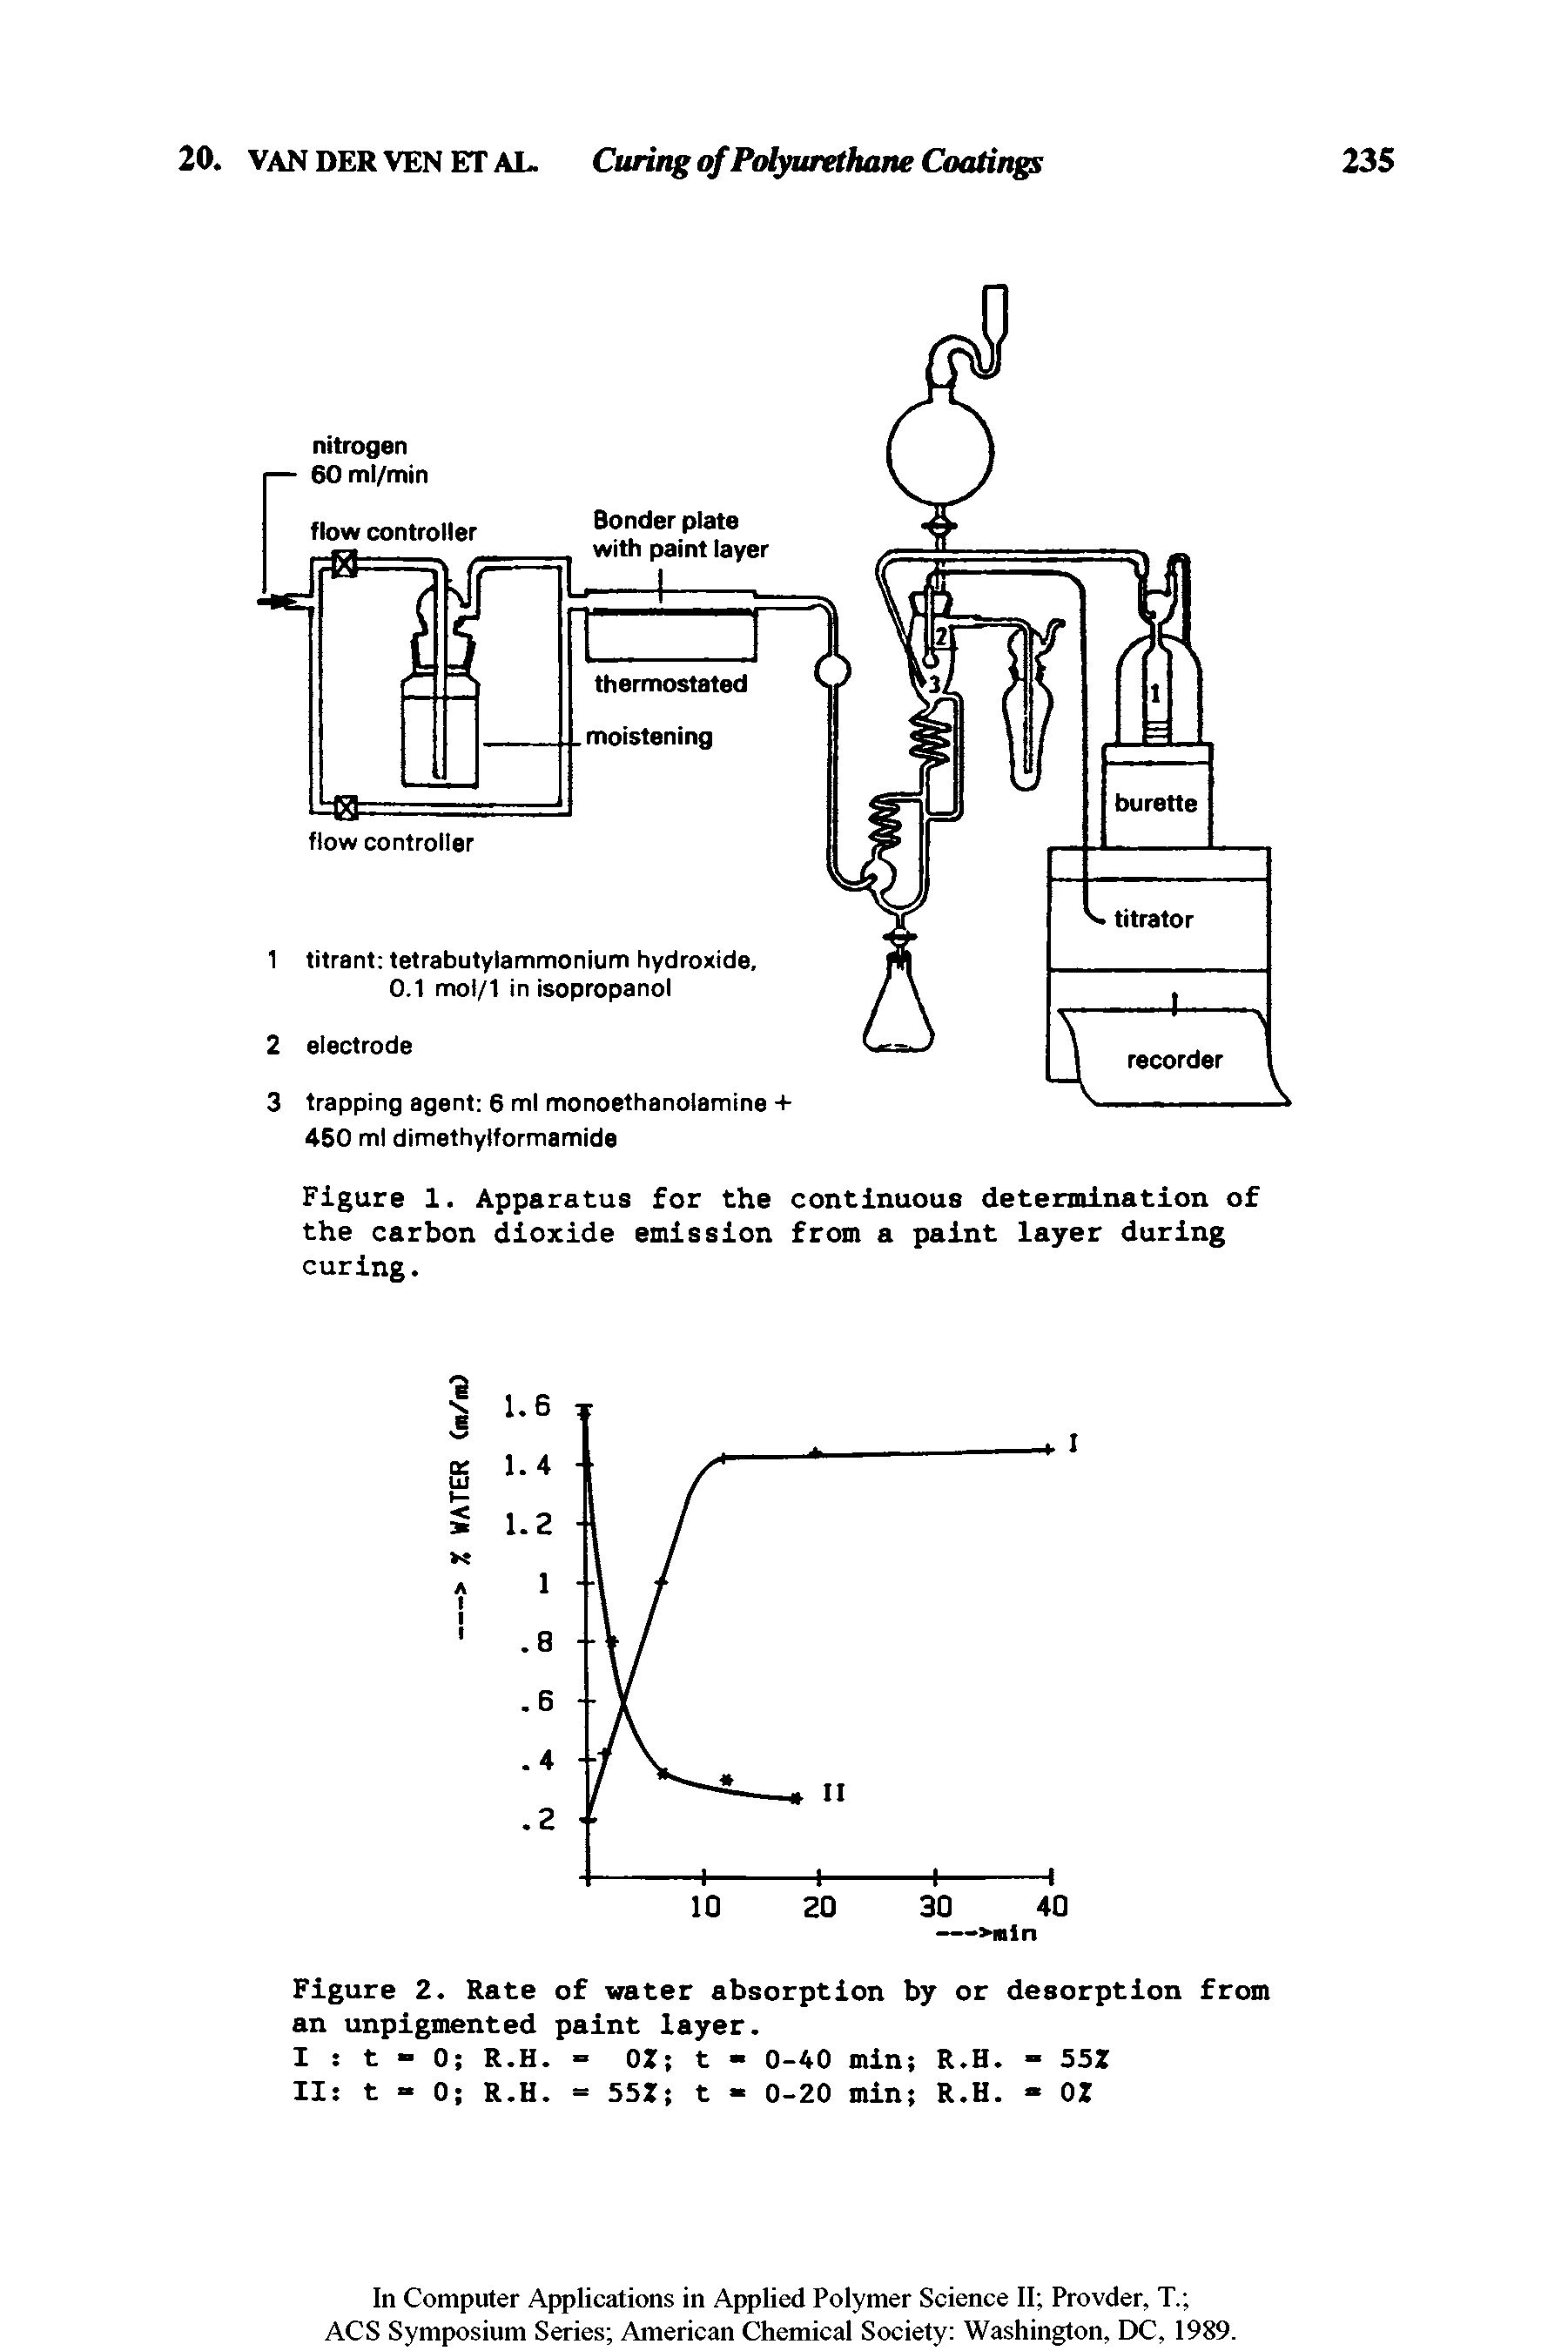 Figure 2. Rate of water absorption by or desorption from an unplgmented paint layer.